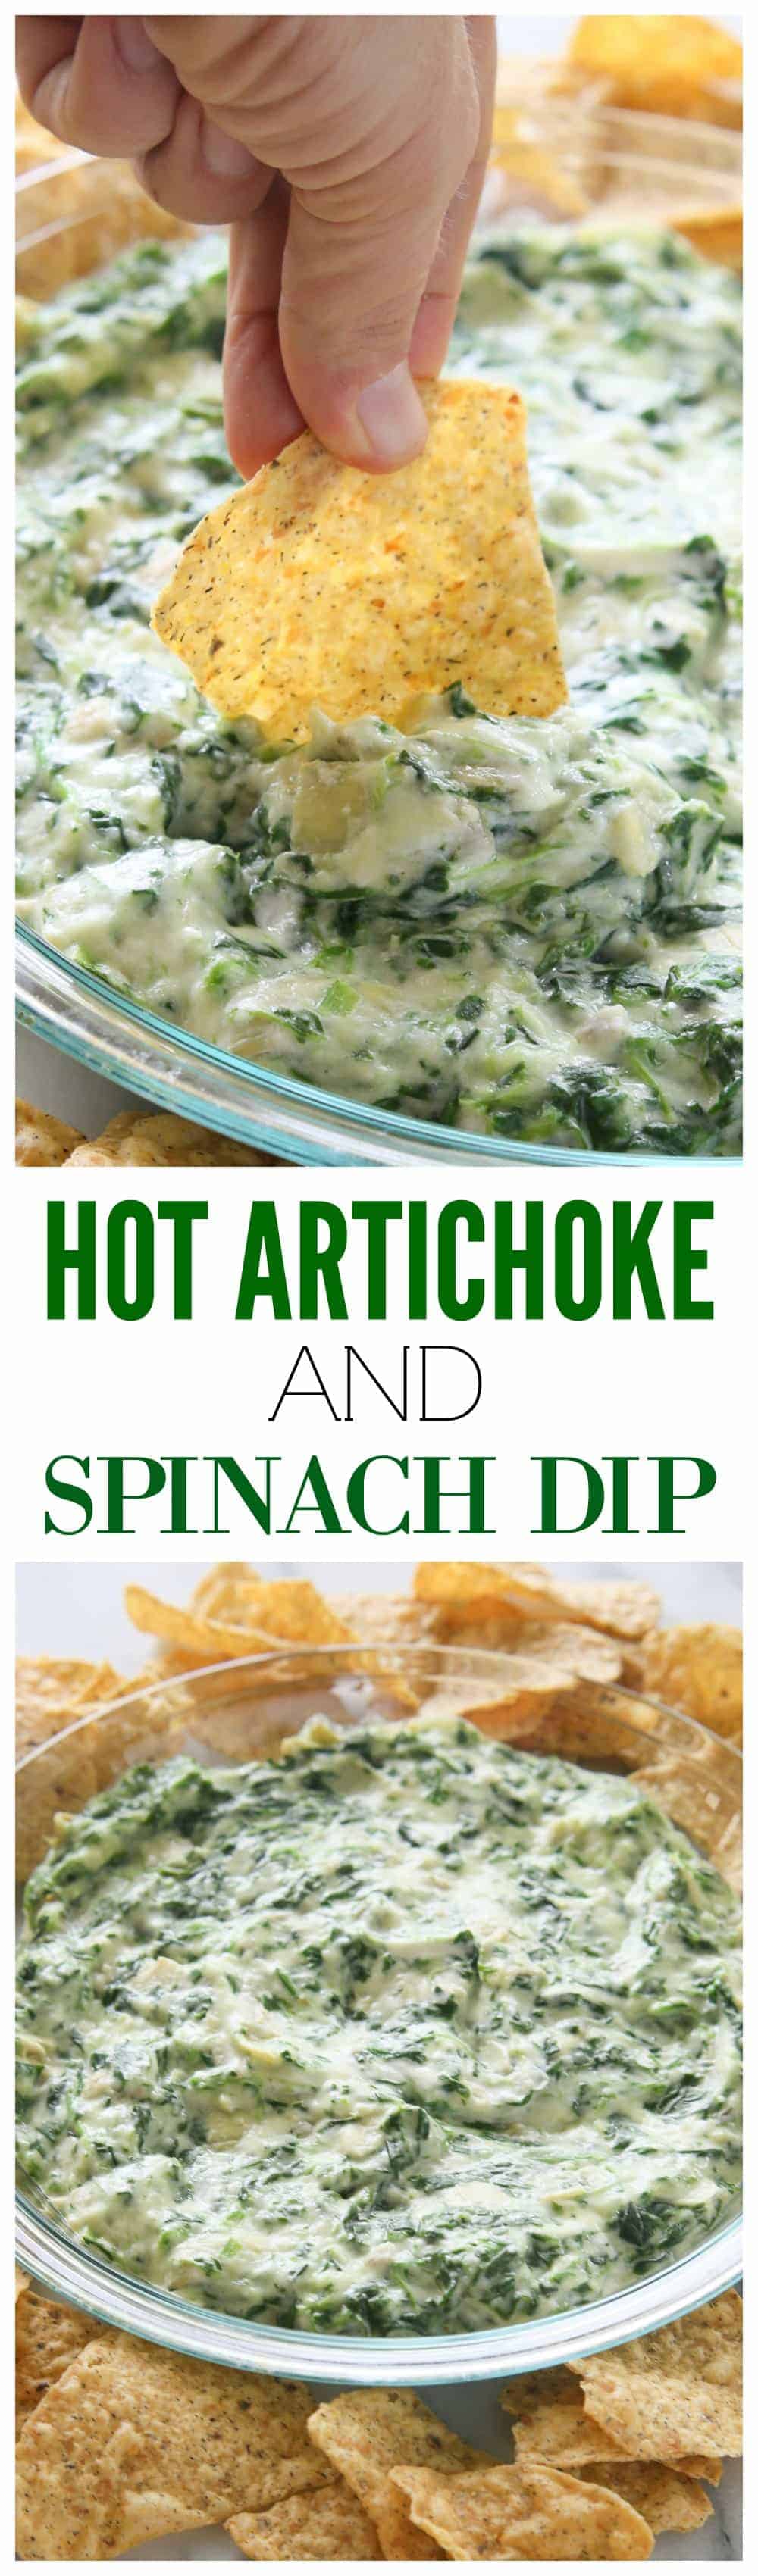 Hot Spinach Artichoke Dip - so easy and our go-to dip! #easy #hot #spinach #artichoke #dip #recipe